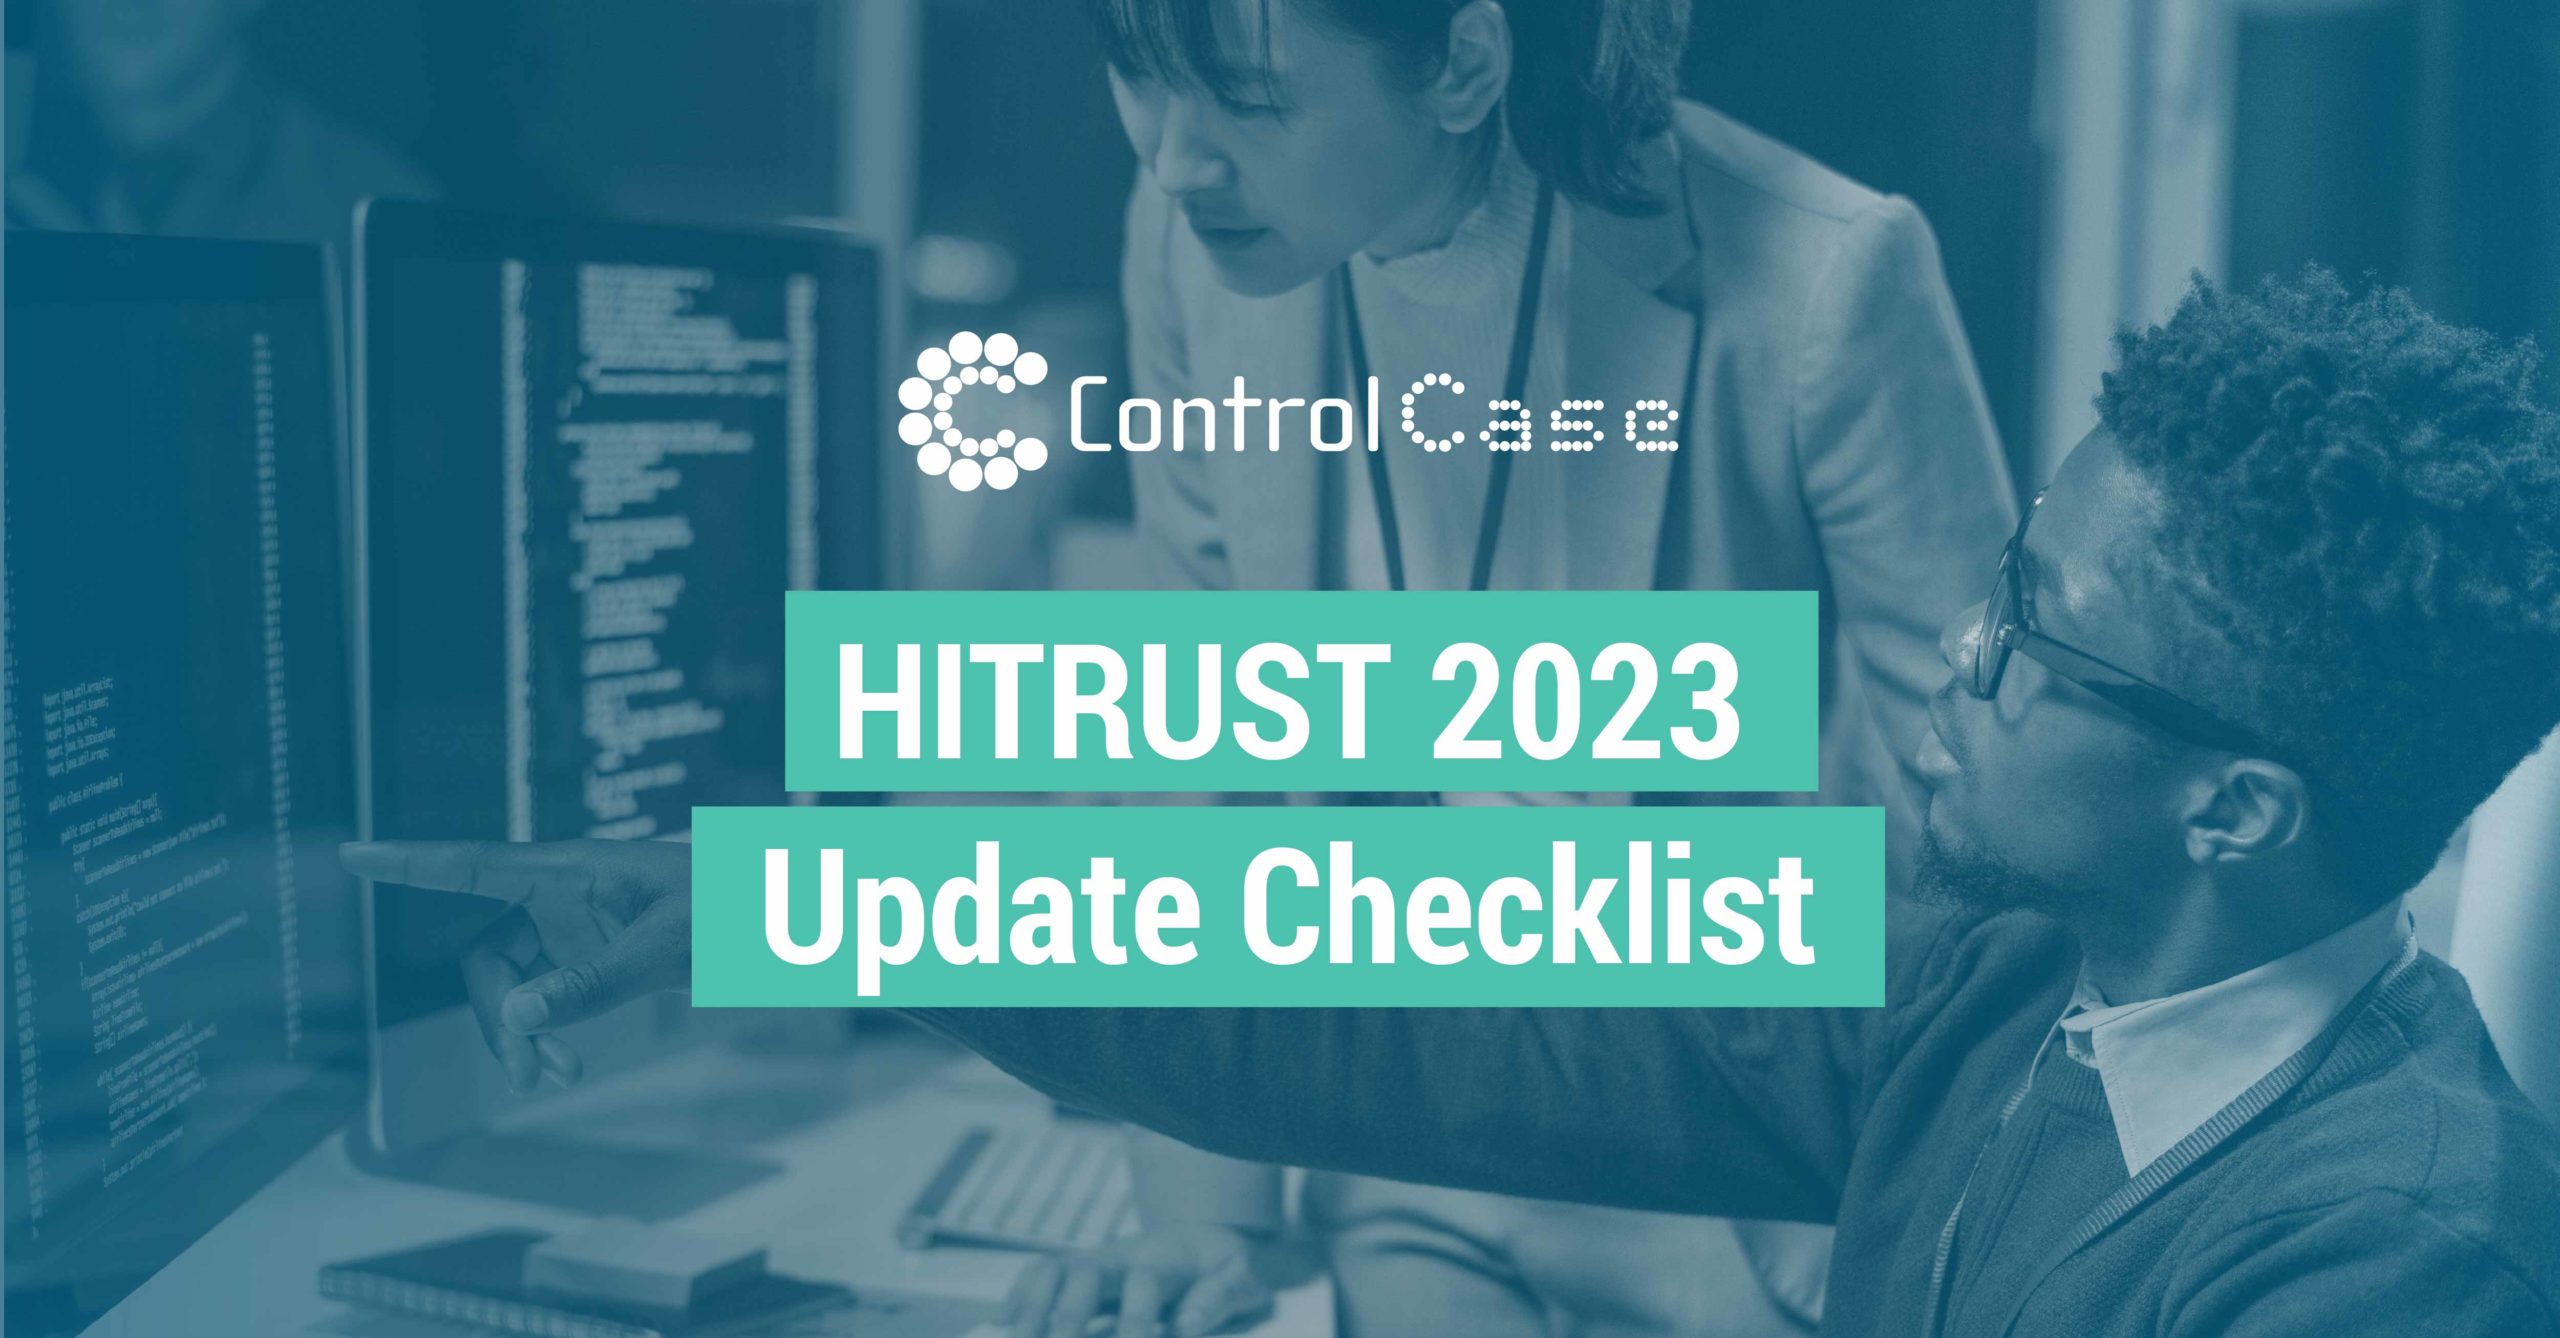 HITRUST Update Checklist Free download from ControlCase